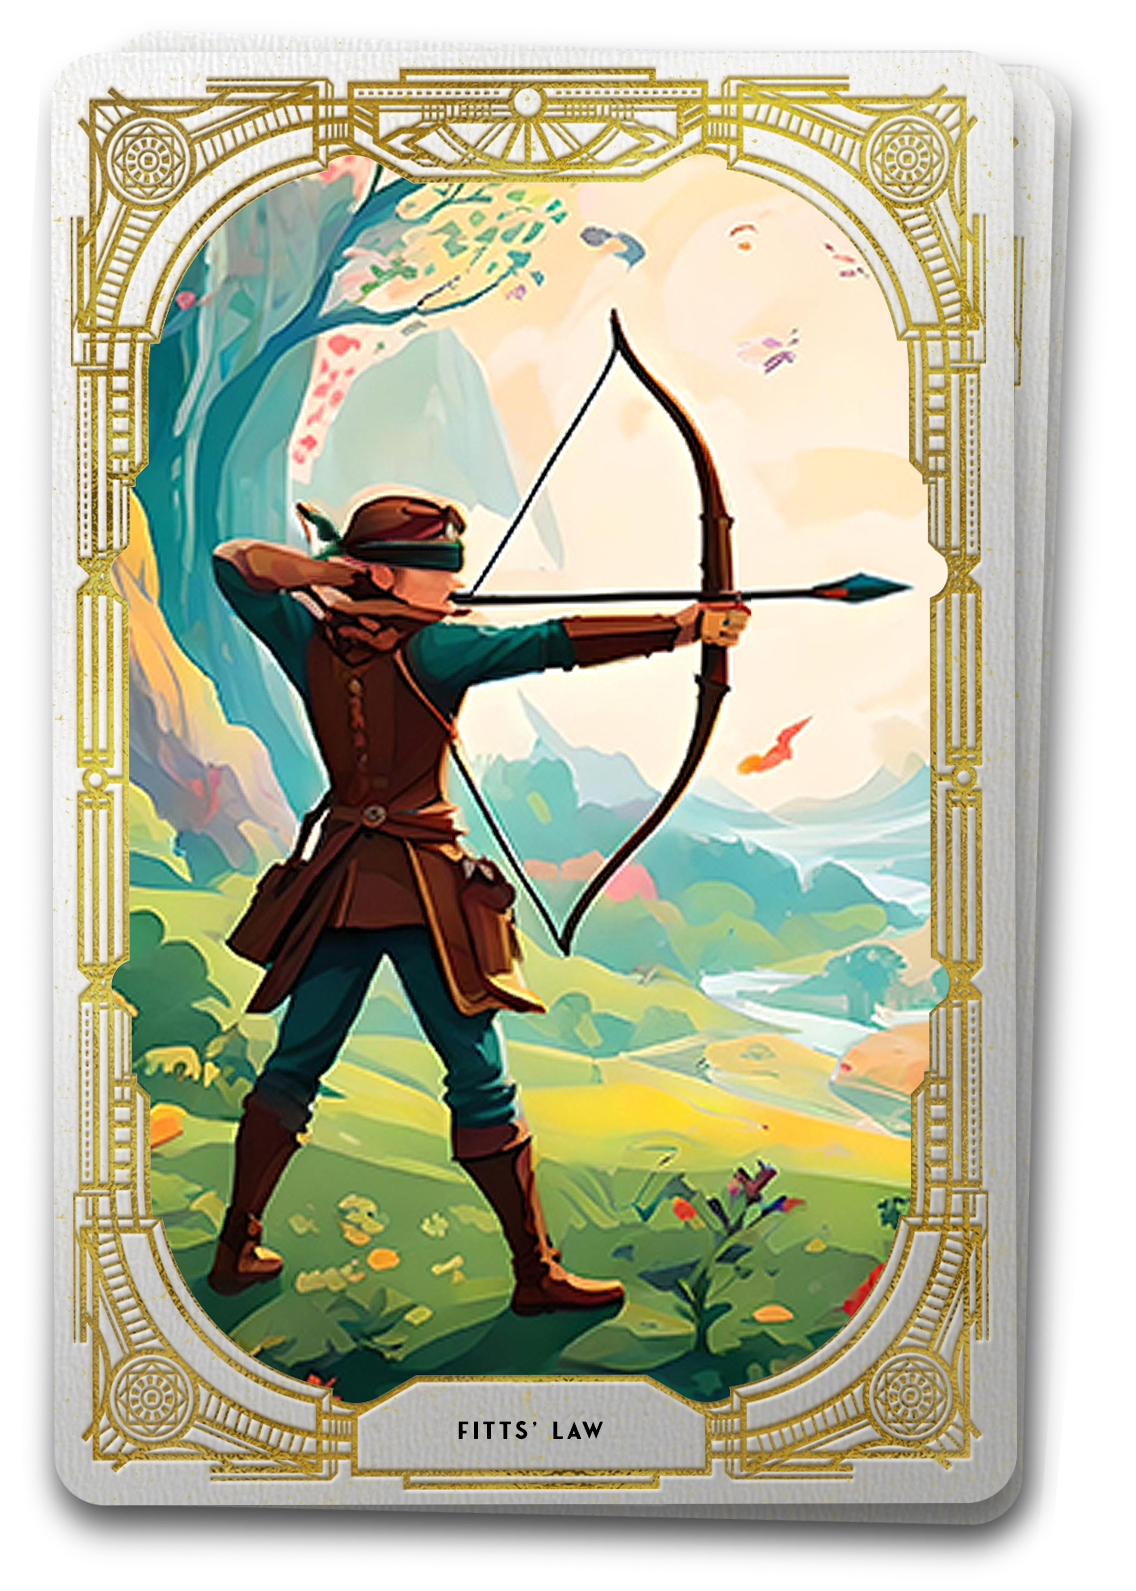 A tarot card featuring the image of a blindfolded archer takes aim at an impossibly difficult target illustrating the concept of the Fitts' Law in UX design.